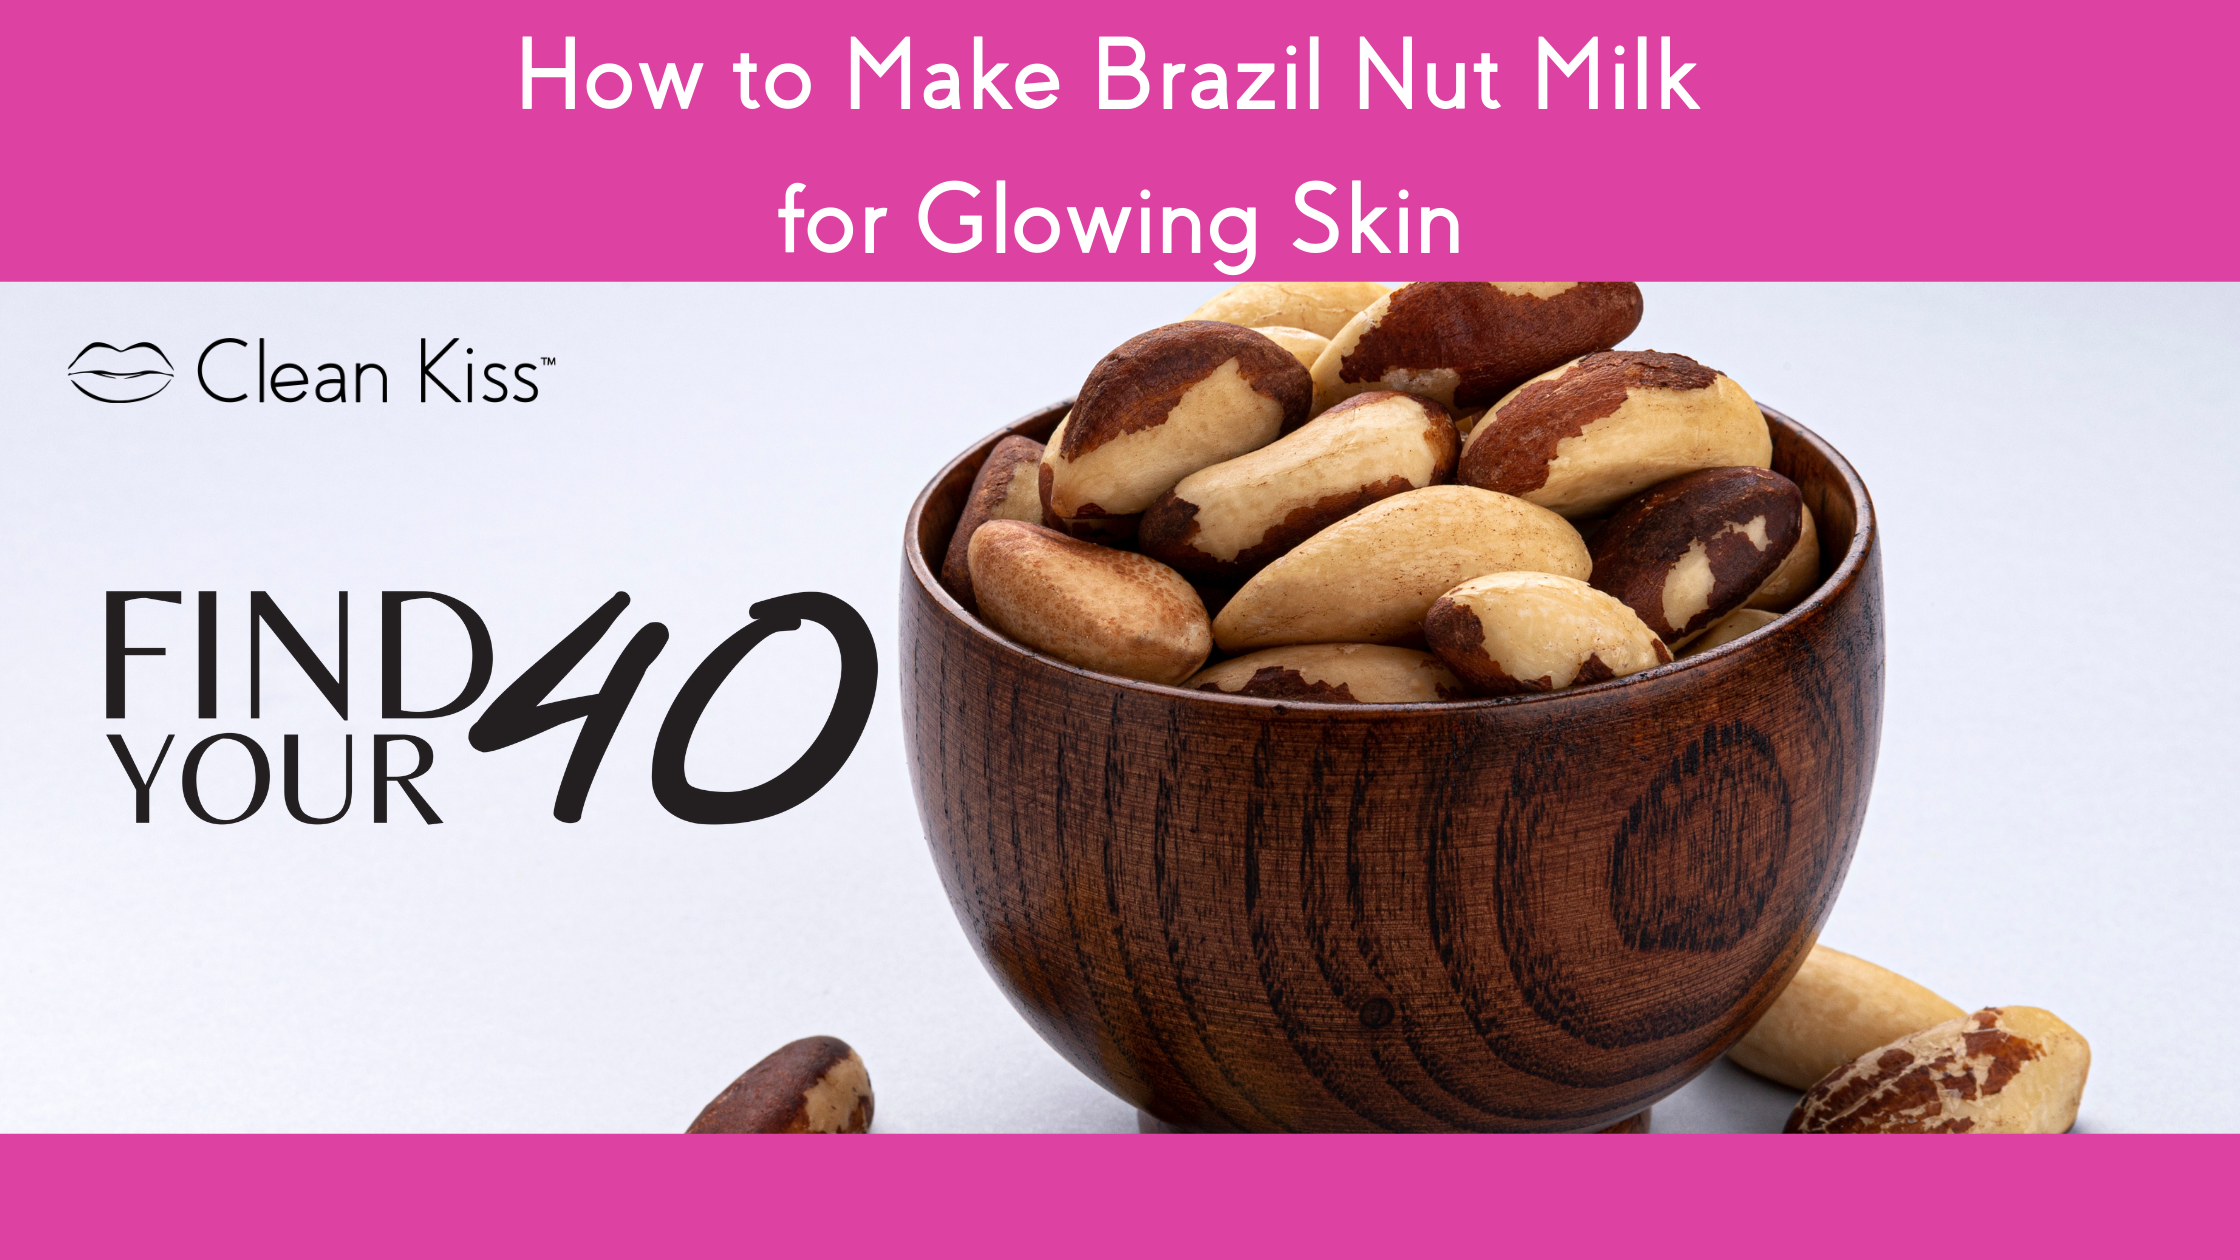 How to Make Brazil Nut Milk for Glowing Skin